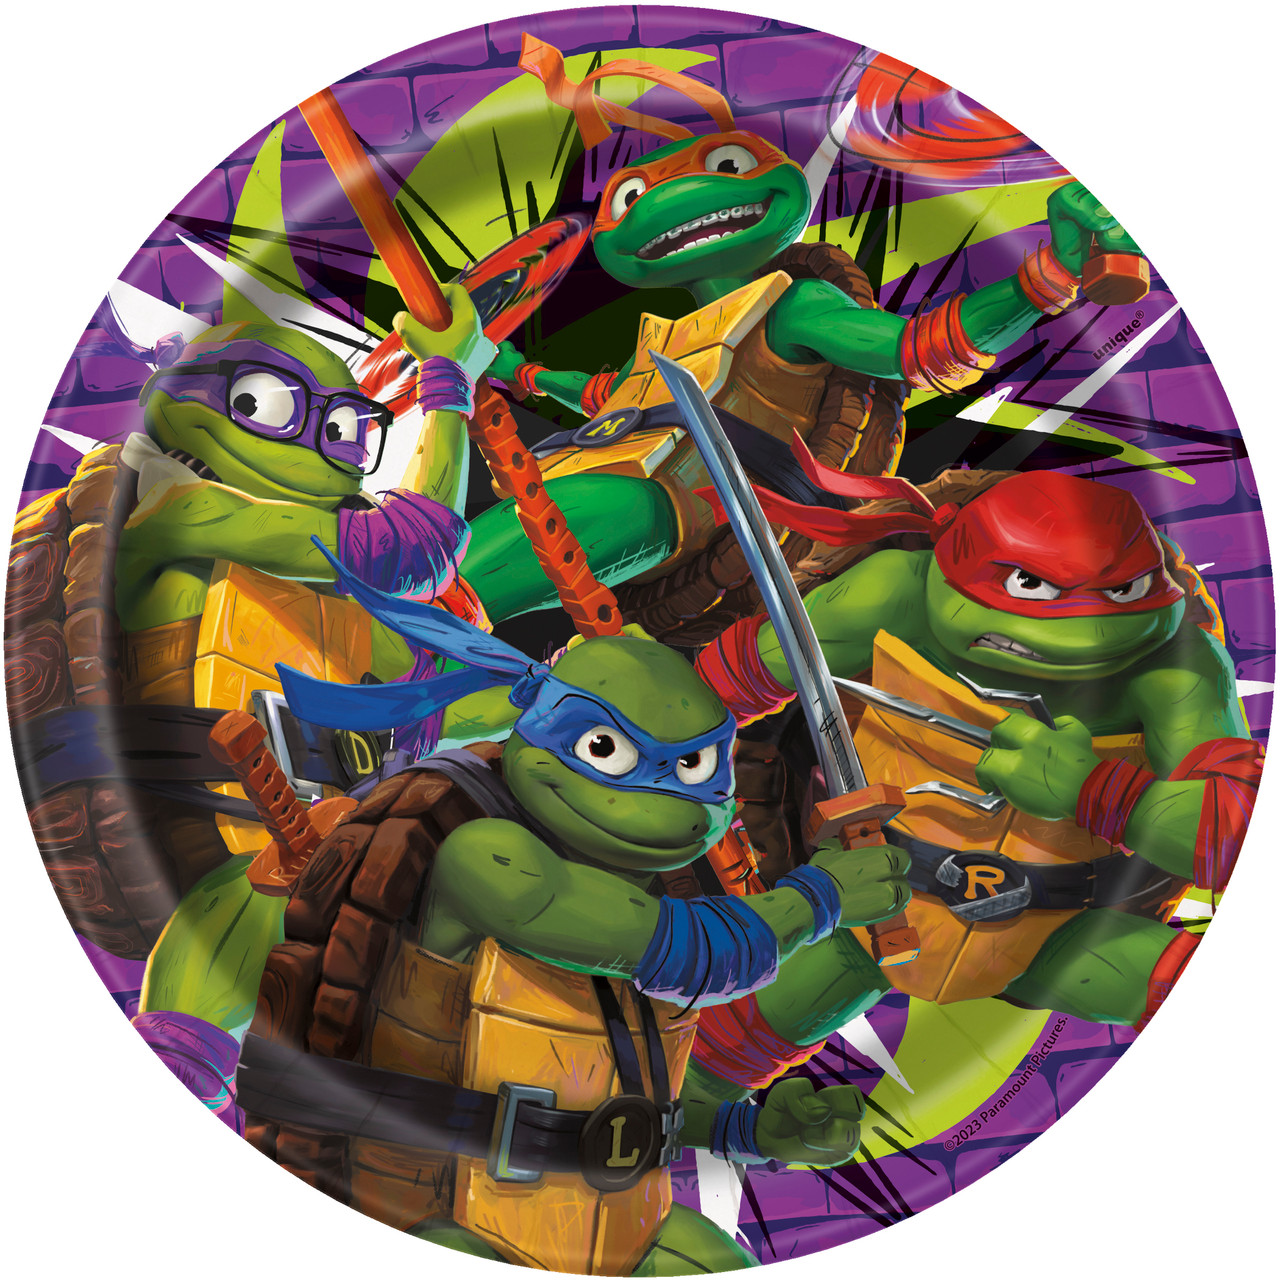 TMNT Mutant Ninja Turtles Birthday Party Supplies Decoration Favors Bundle for 16 Includes Plates, Cups, Napkins, Table Cover, Loot Bags, Paper